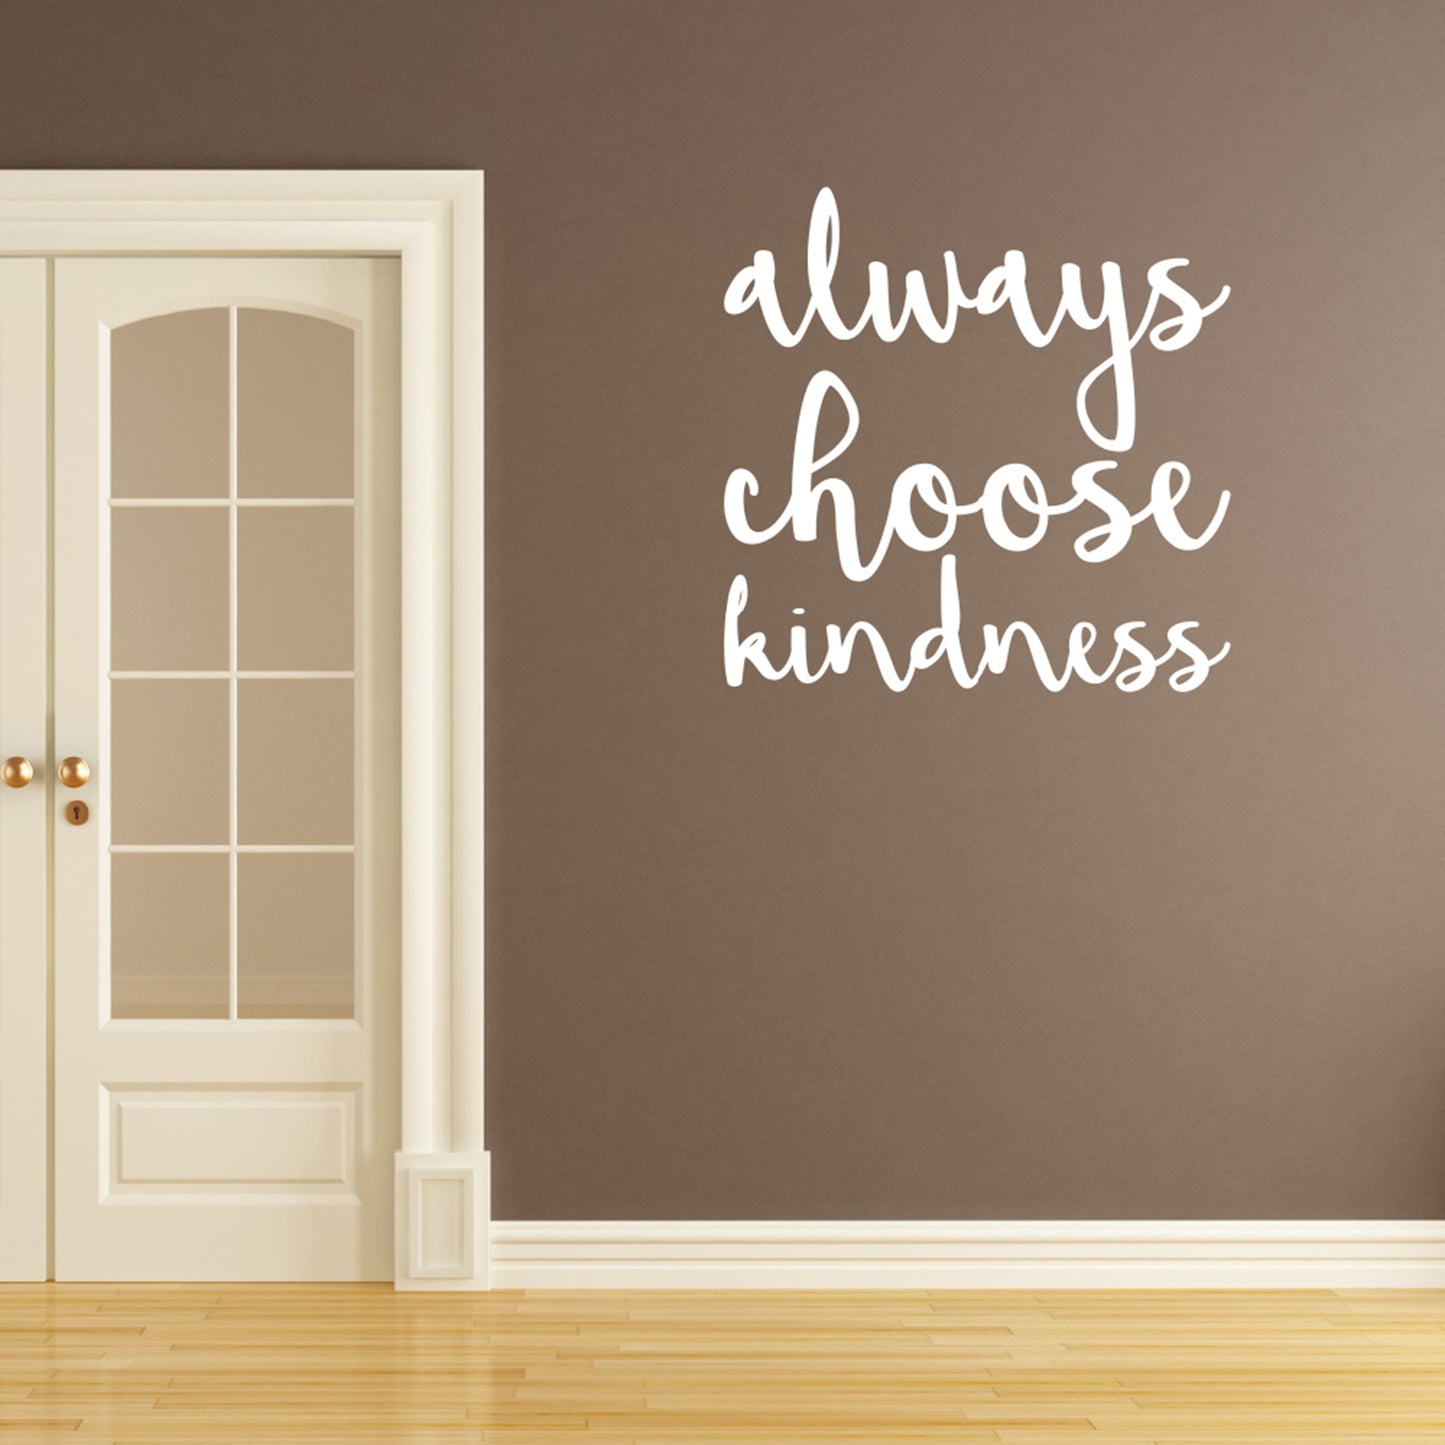 Always choose kindness | Wall quote